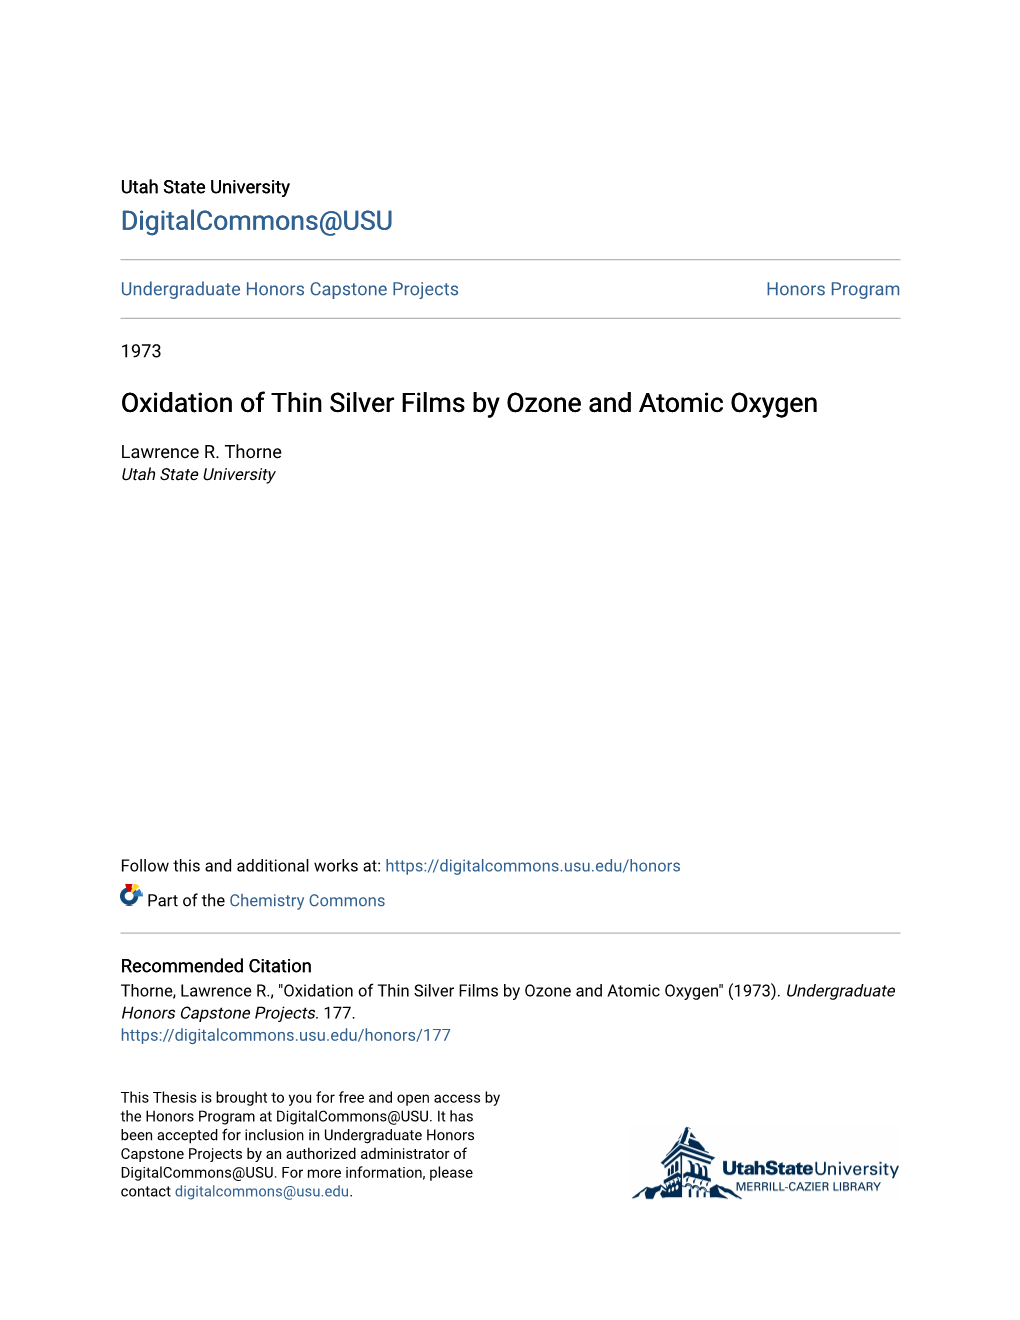 Oxidation of Thin Silver Films by Ozone and Atomic Oxygen